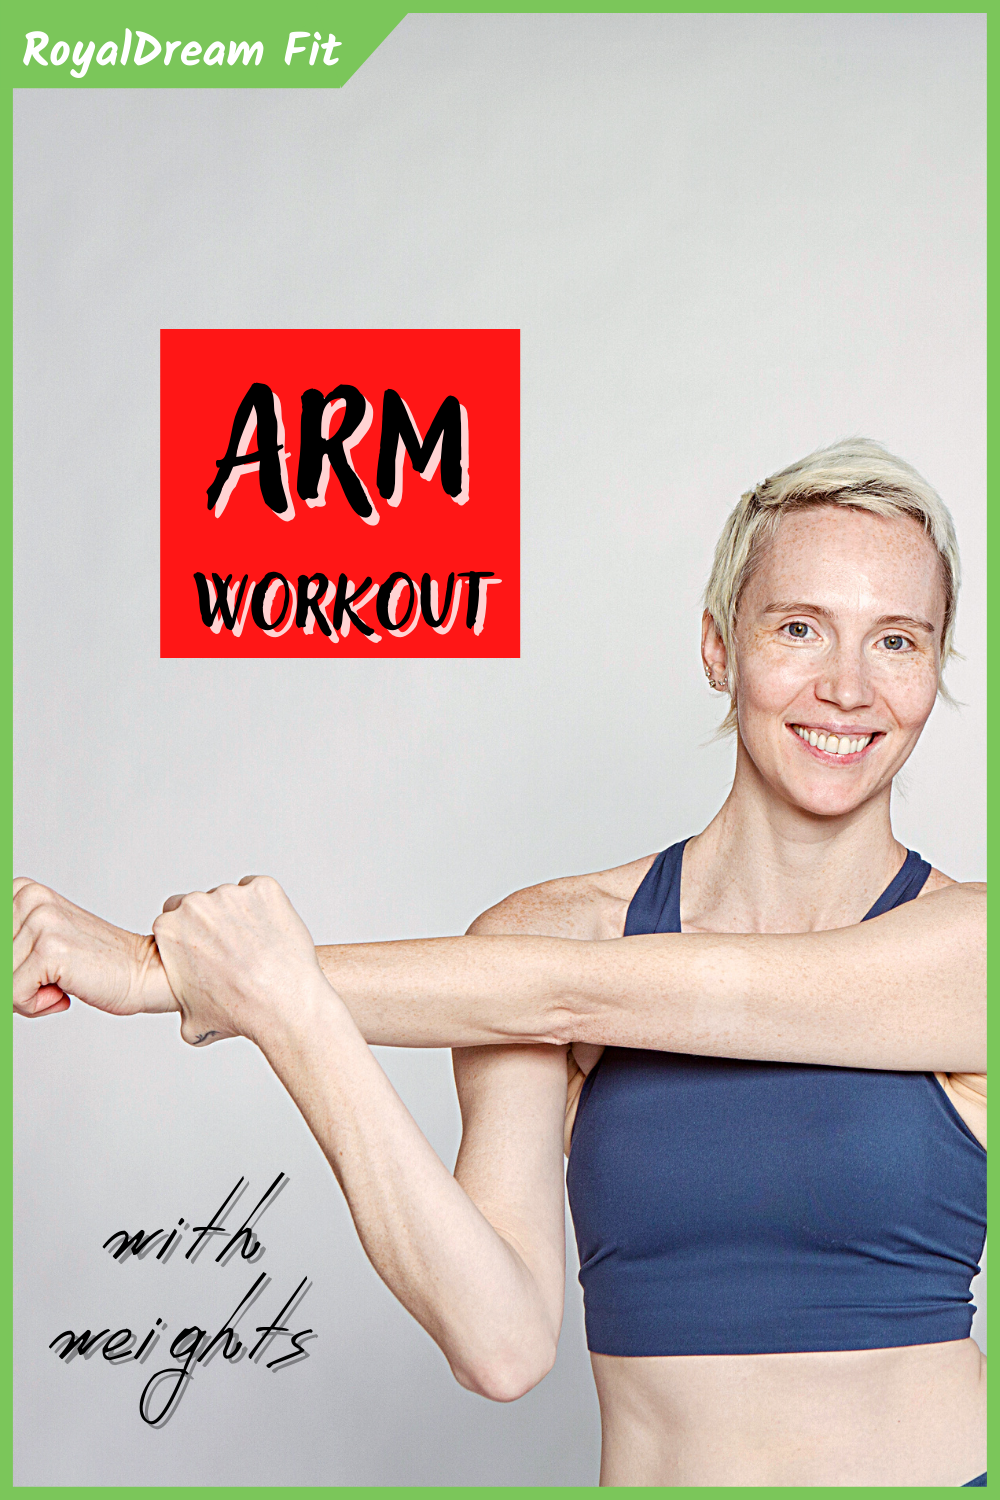 Tone your arms at home with this arm workout with weights!